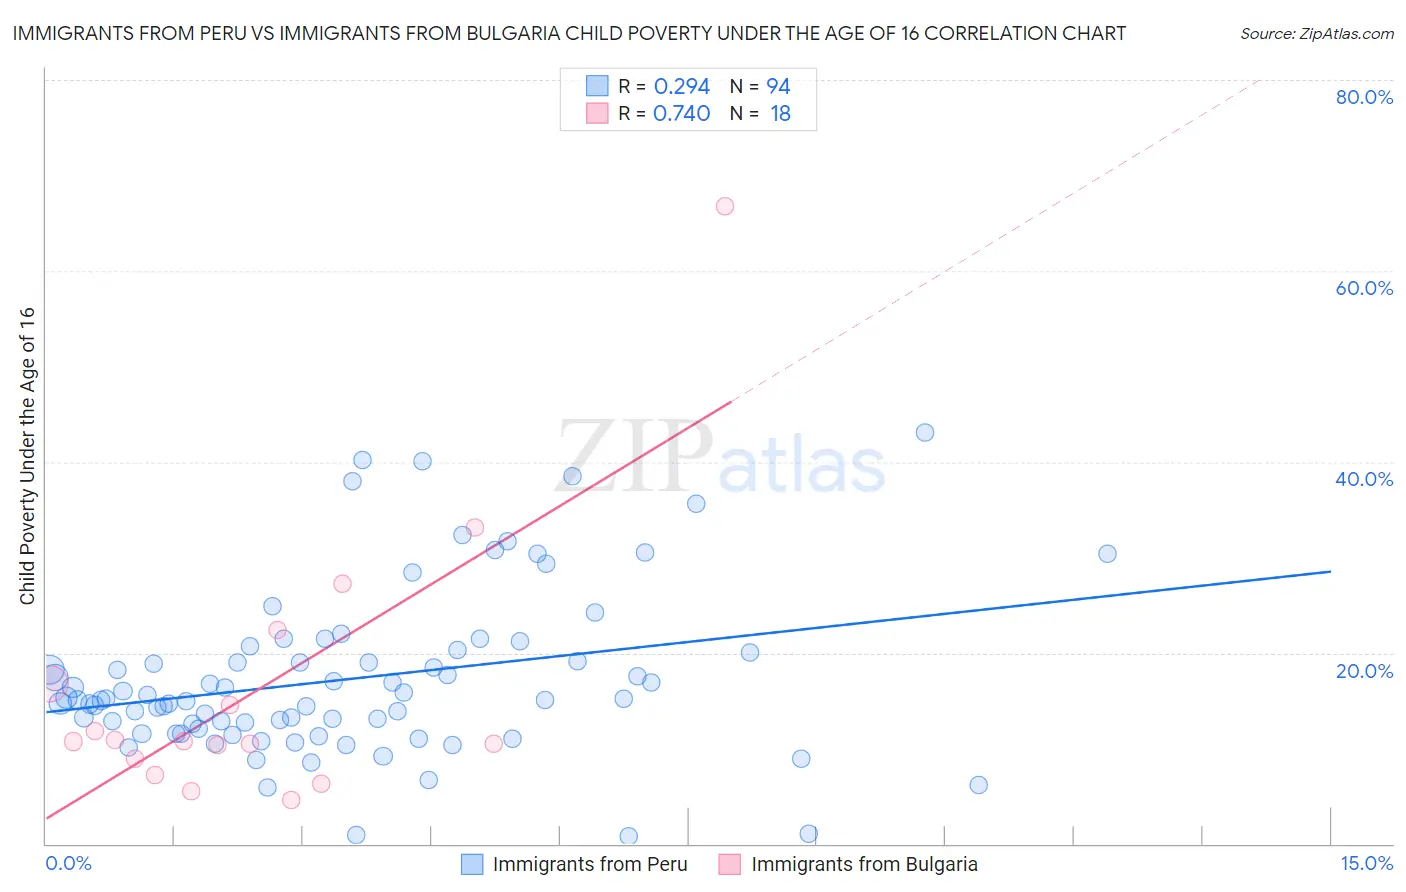 Immigrants from Peru vs Immigrants from Bulgaria Child Poverty Under the Age of 16